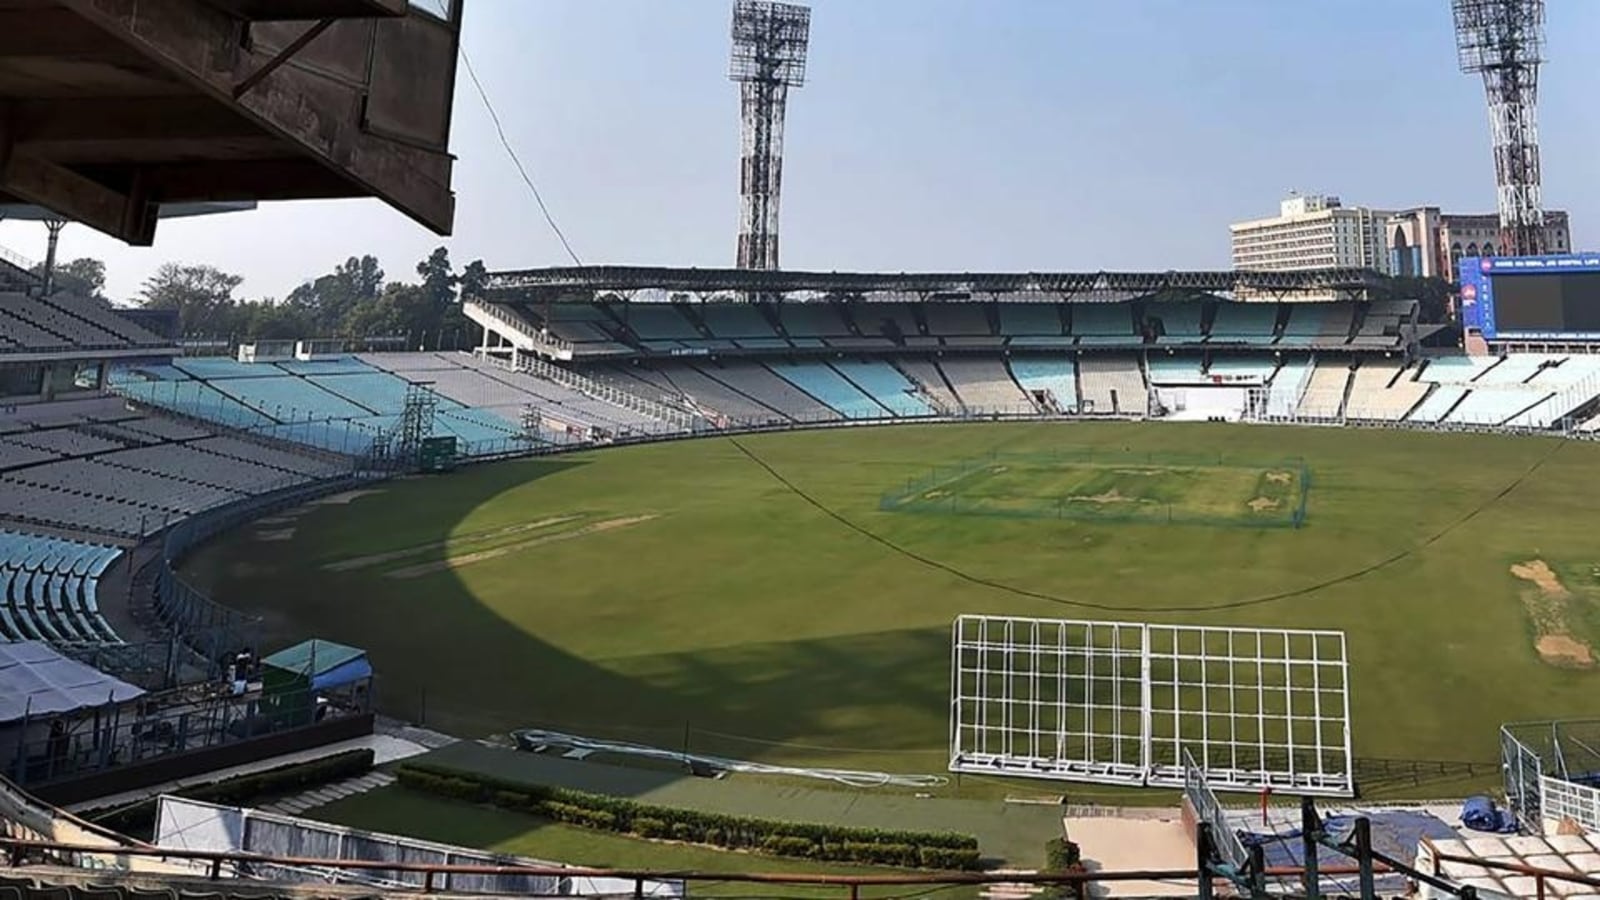 WB government gives nod to 75 per cent attendance for Eden Gardens